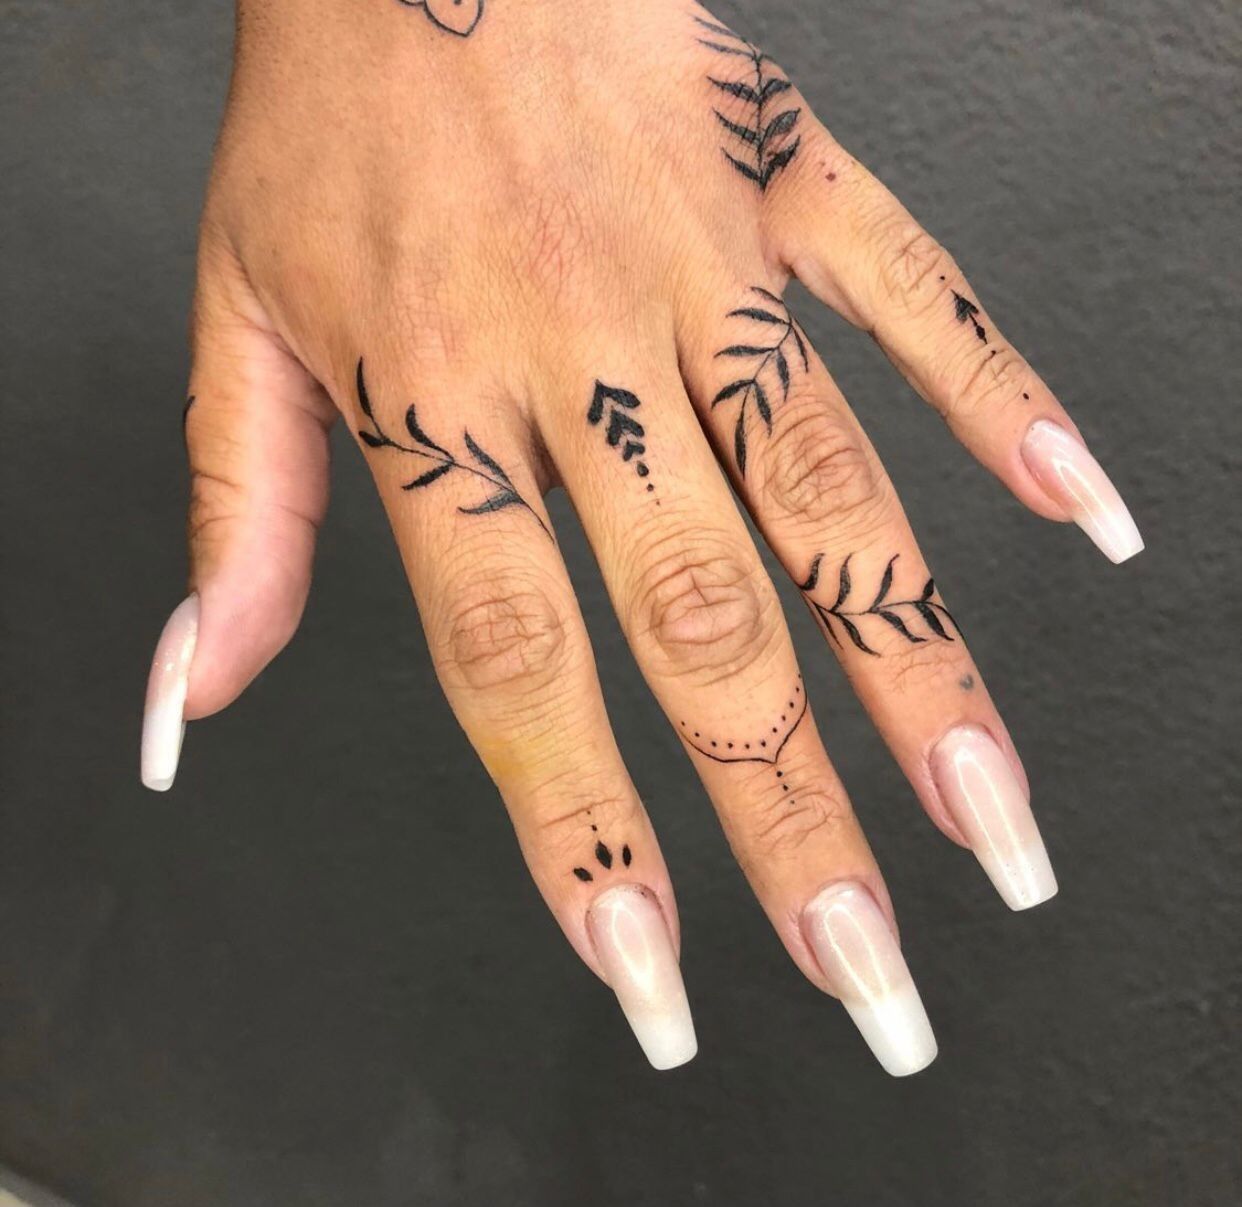 Tattoo ideas for womens fingers